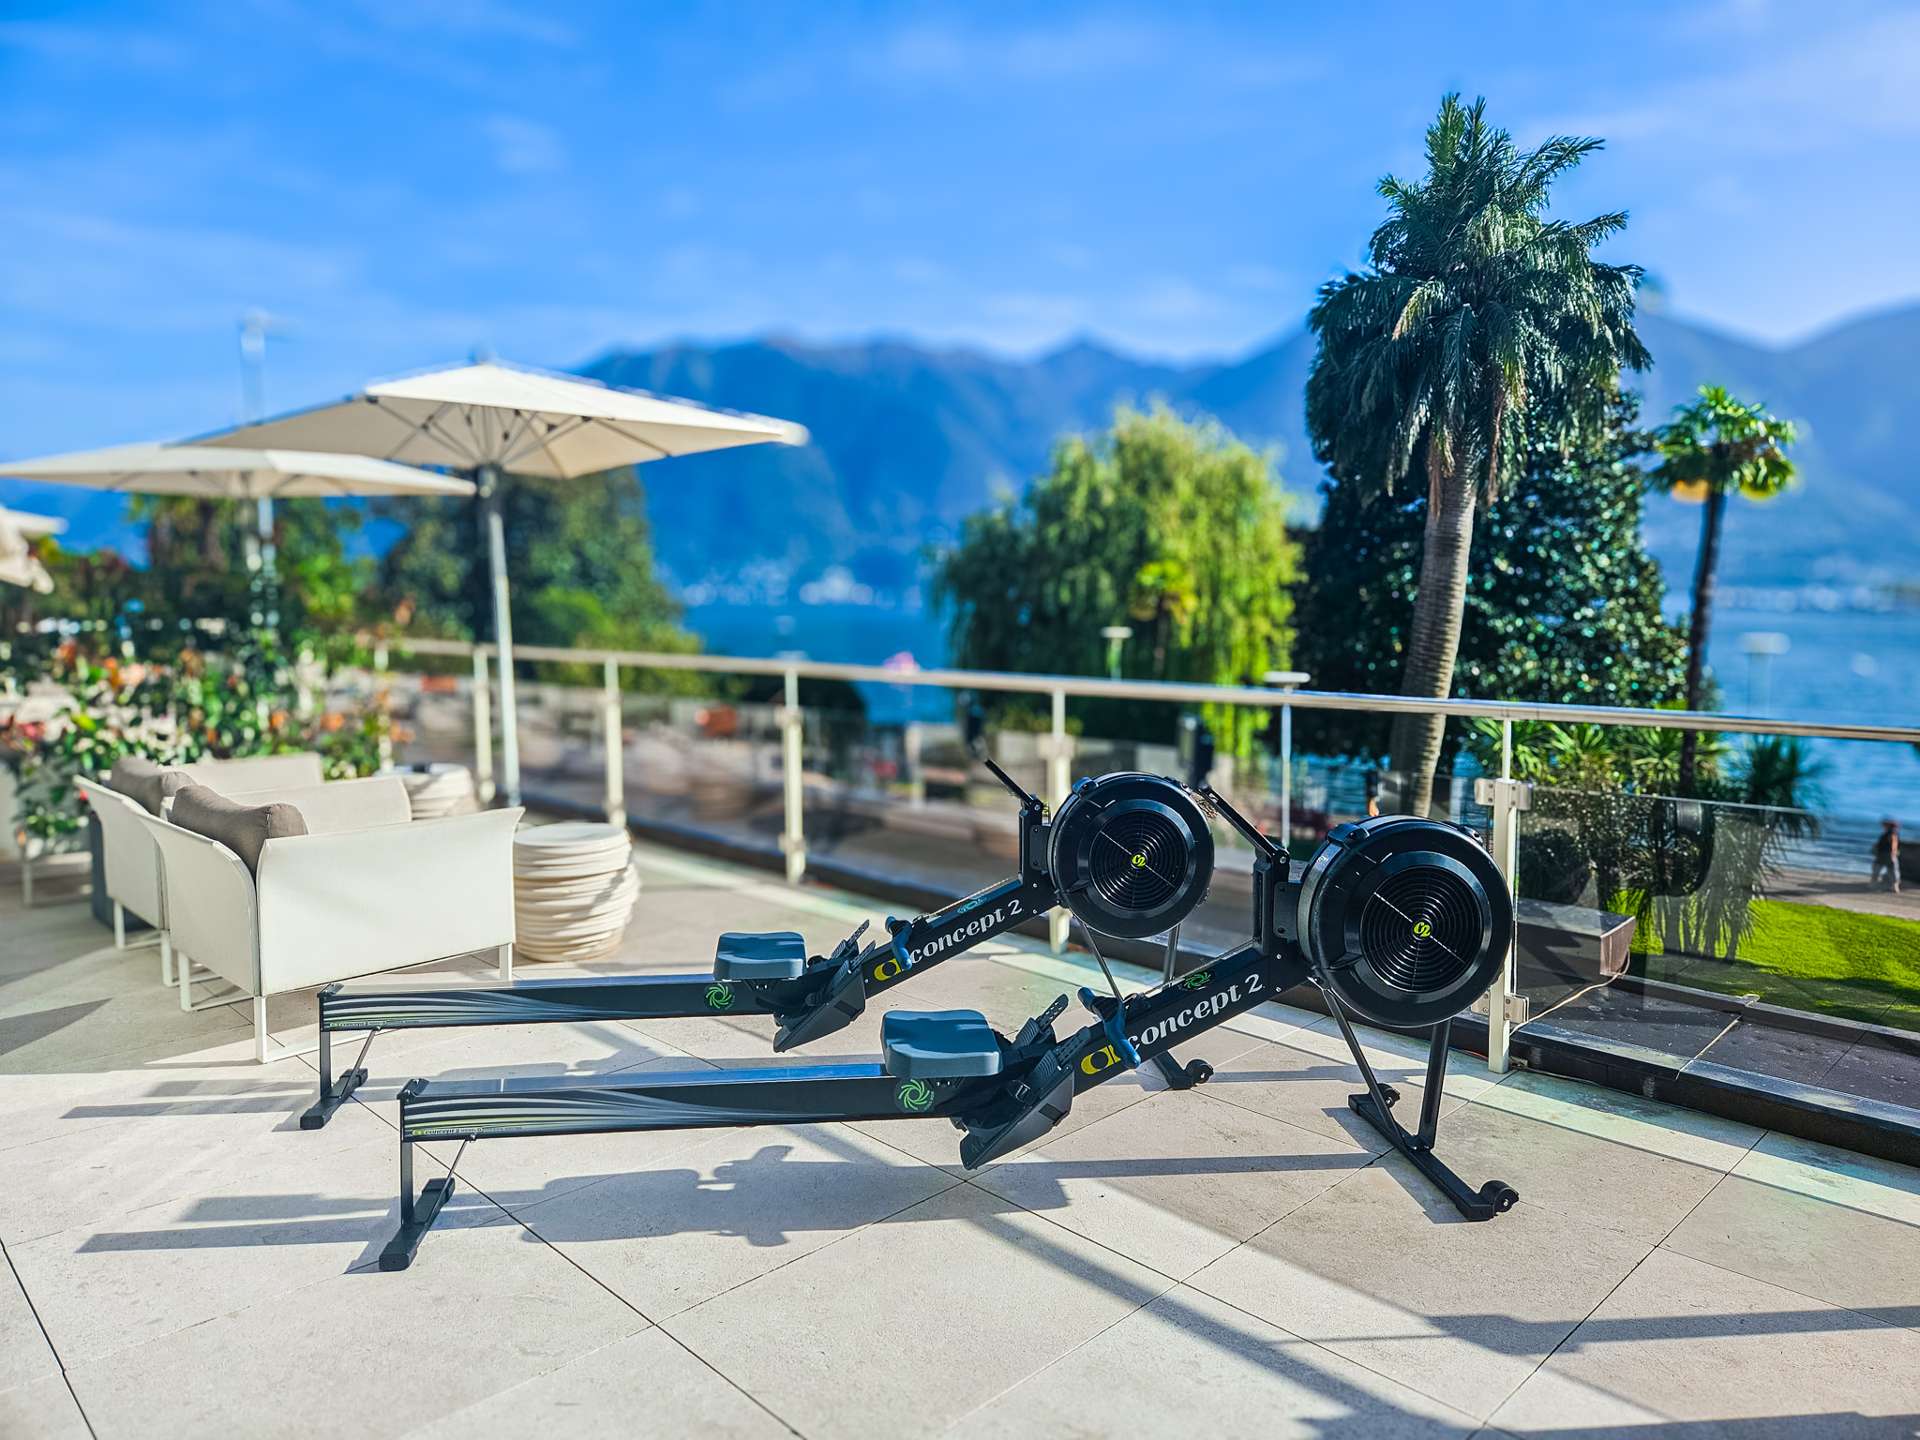 Indoor Rowing Retreat ROW&RELAX by SOUL ROW, Locarno